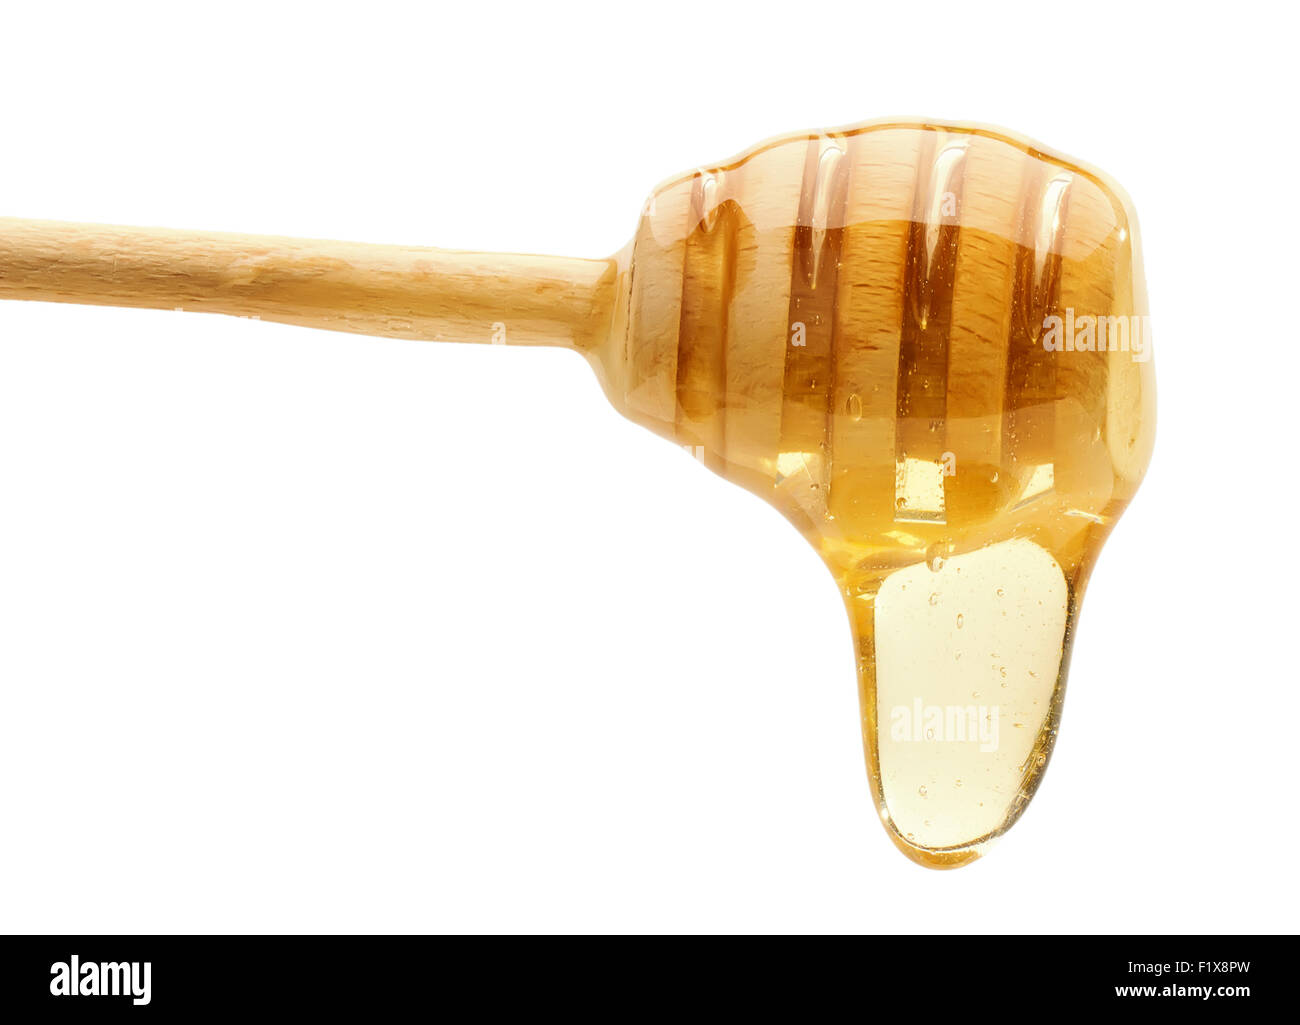 Honey dripping from a wooden honey dipper isolated on the white background. Stock Photo